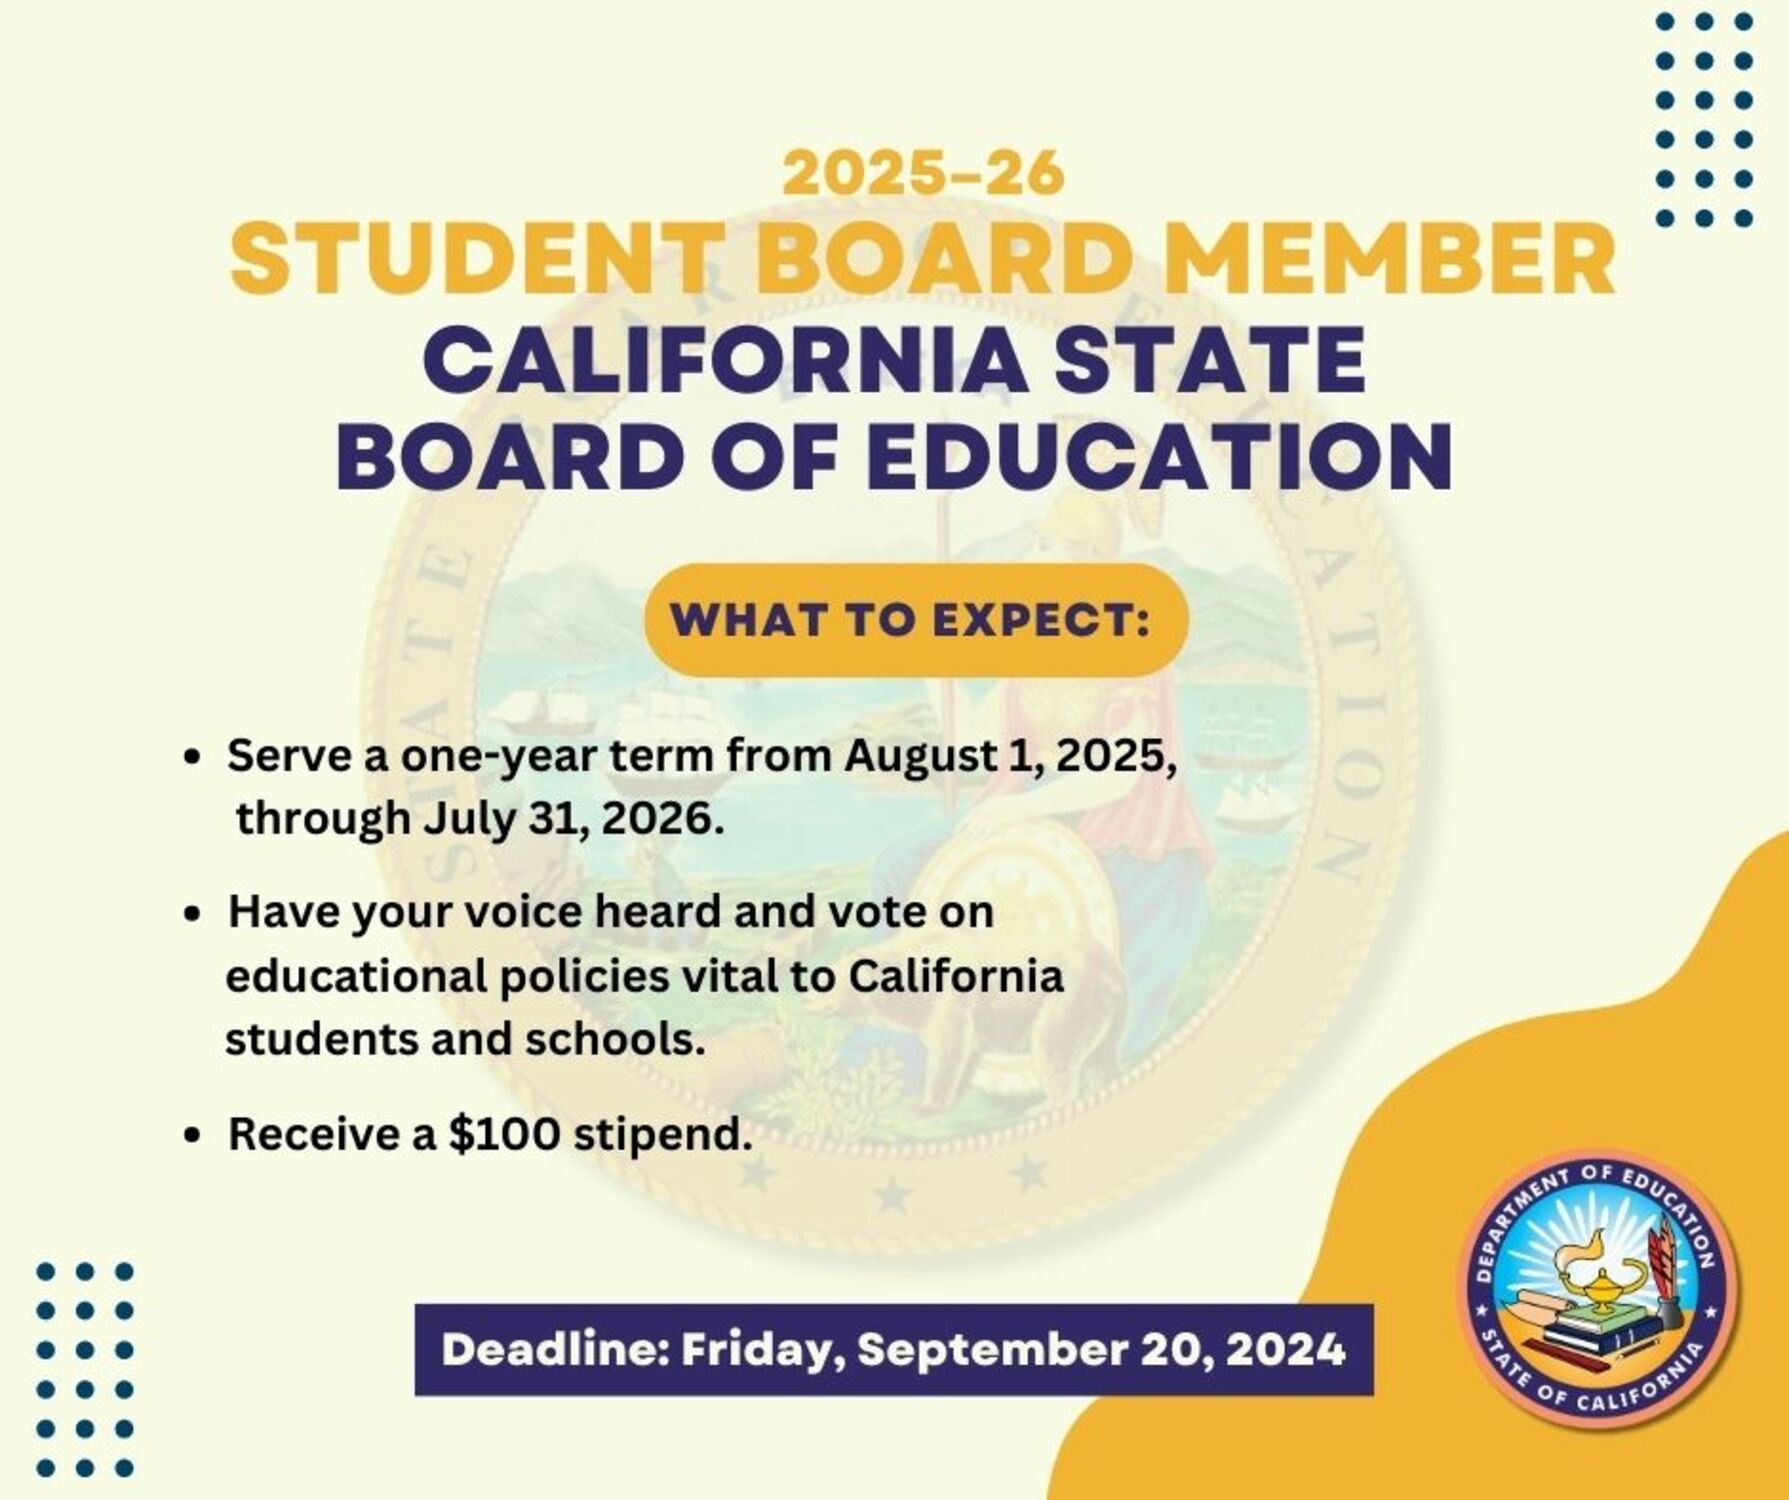 Maria Lupita Stubbs, candidate for the Placentia-Yorba Linda Unified School District (PYLUSD) shares a unique opportunity for students offered by the CA DOE